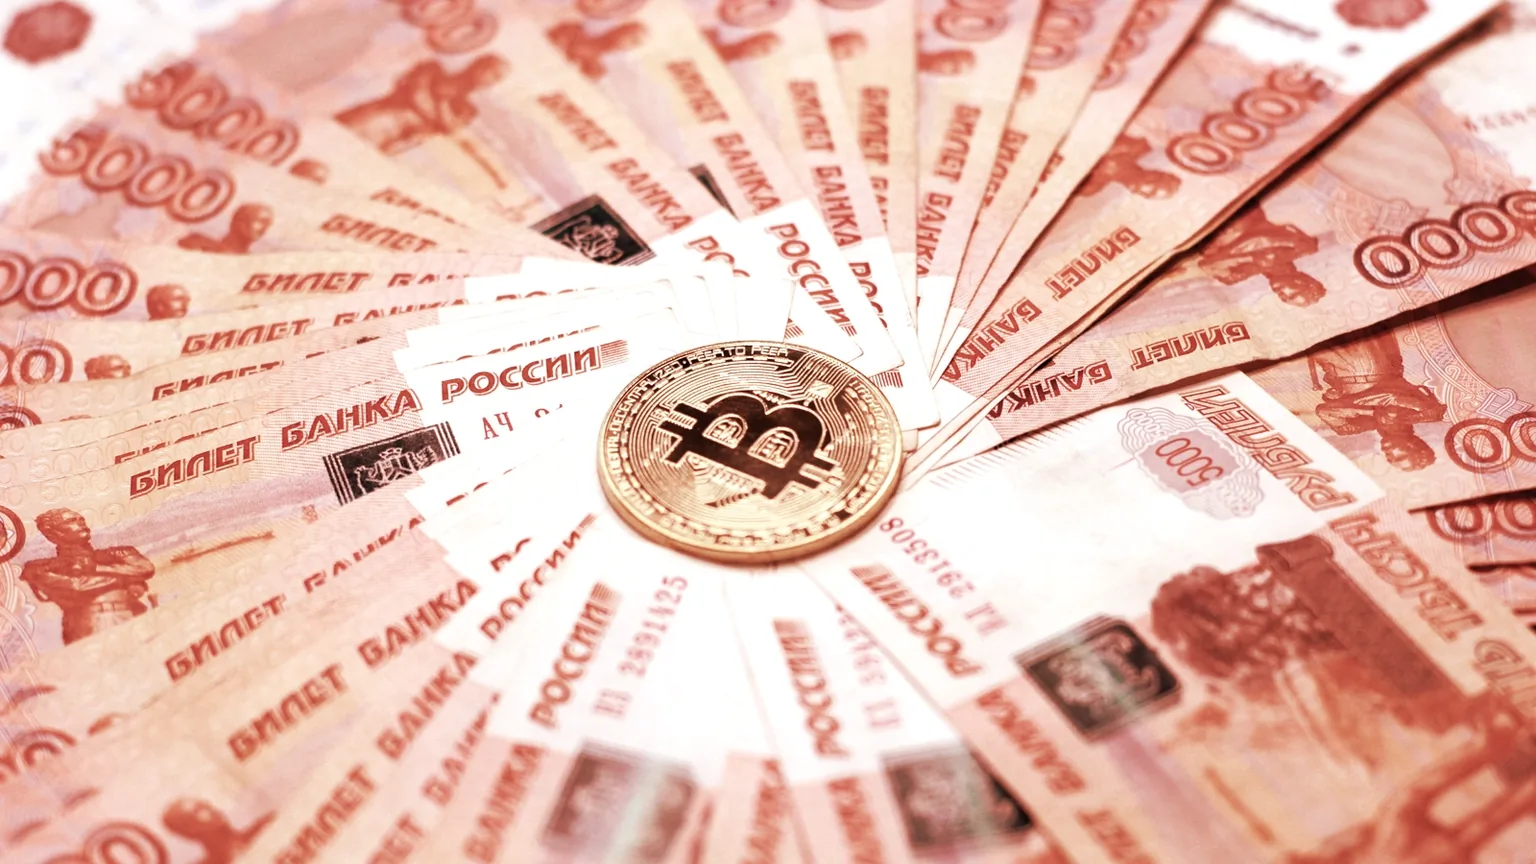 Cryptocurrencies like Bitcoin are growing in popularity in Russia. Image: Shutterstock